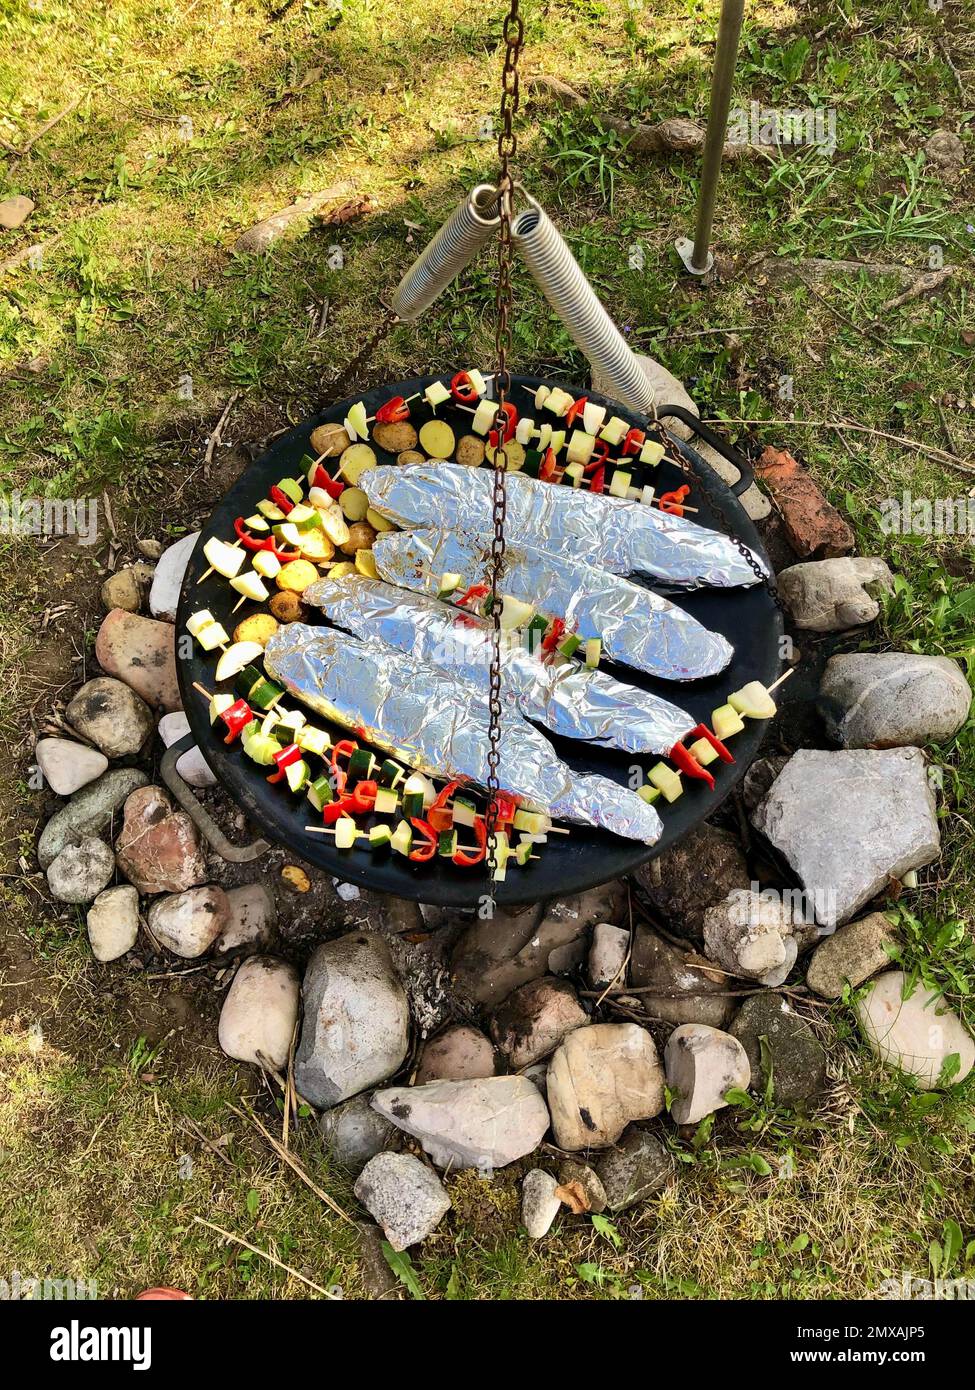 Vegetable skewers and fish wrapped in aluminium foil on a swivel grill over a barbecue fire, dinner, Germany Stock Photo